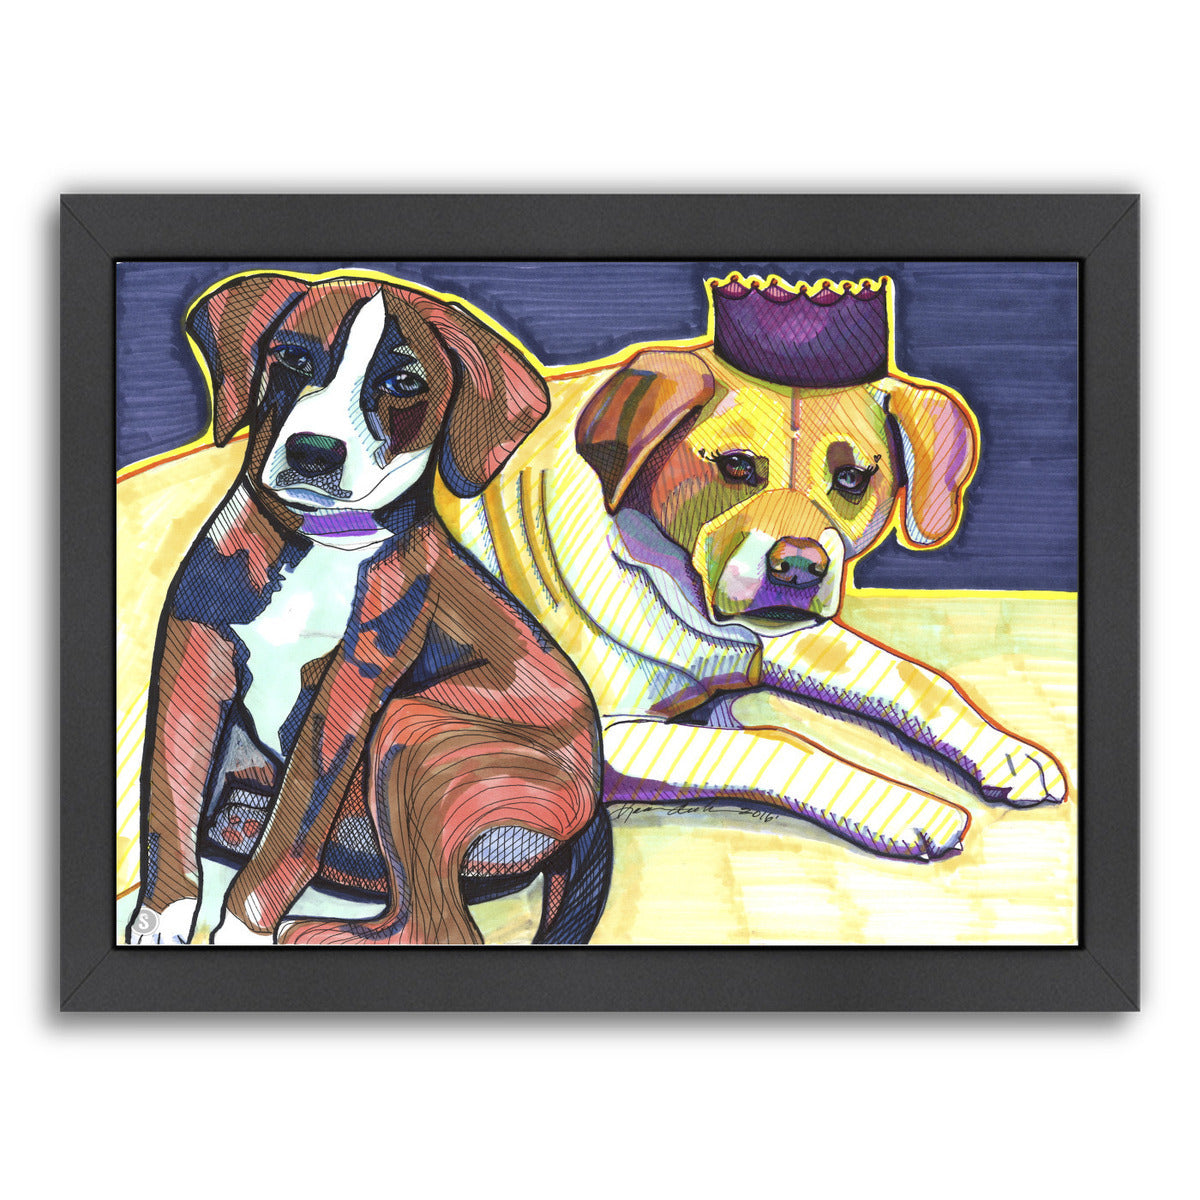 Two Dogs by Solveig Studio Framed Print - Americanflat